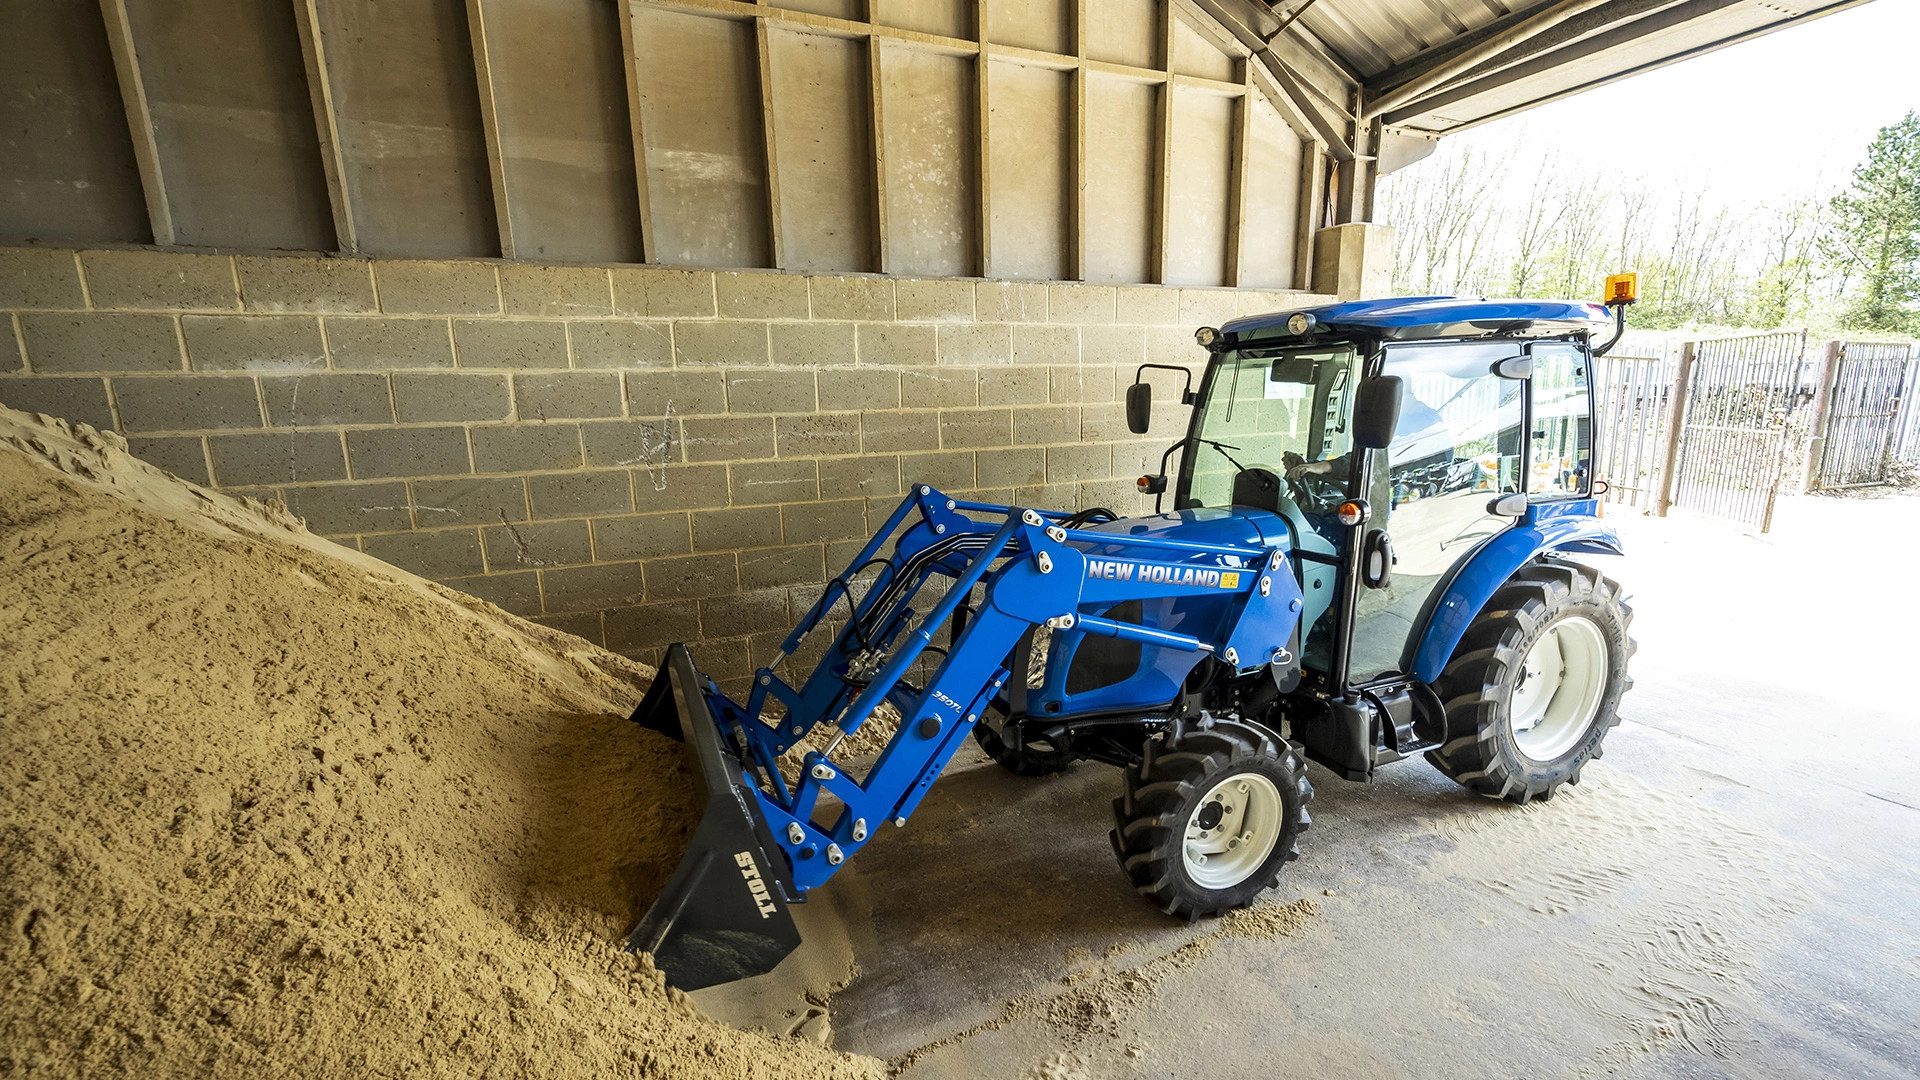 New Holland tractor with front loader bucket moving sand in an industrial storage area.